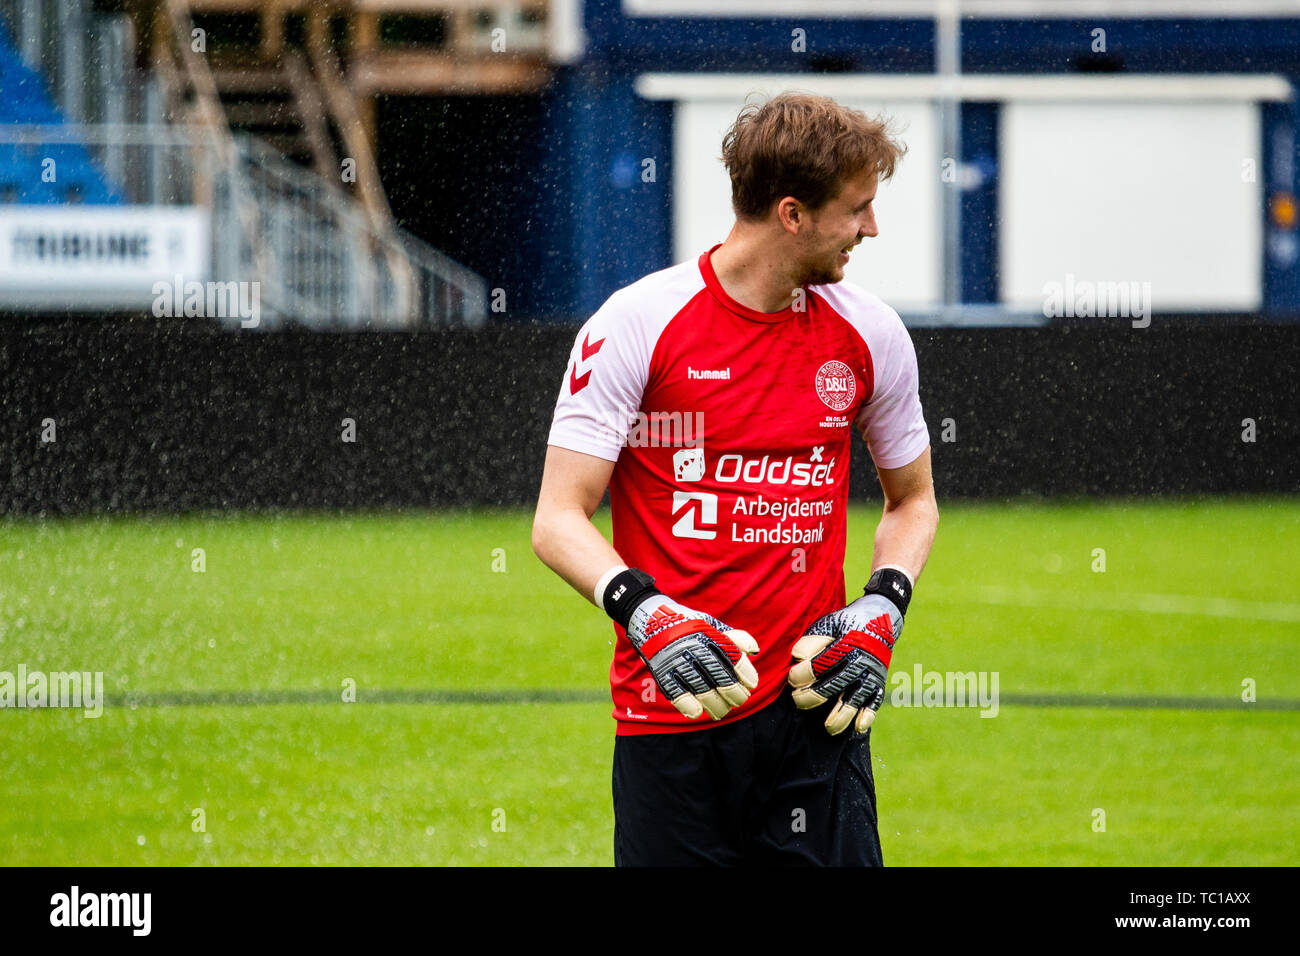 Denmark, Elsinore - June 3, 2019. Goalkeeper Frederik Rønnow of the Danish national football team seen during training before the EURO 2020 qualification matches against Irland and Georgia in group D. (Photo credit: Gonzales Photo - Dejan Obretkovic). Stock Photo